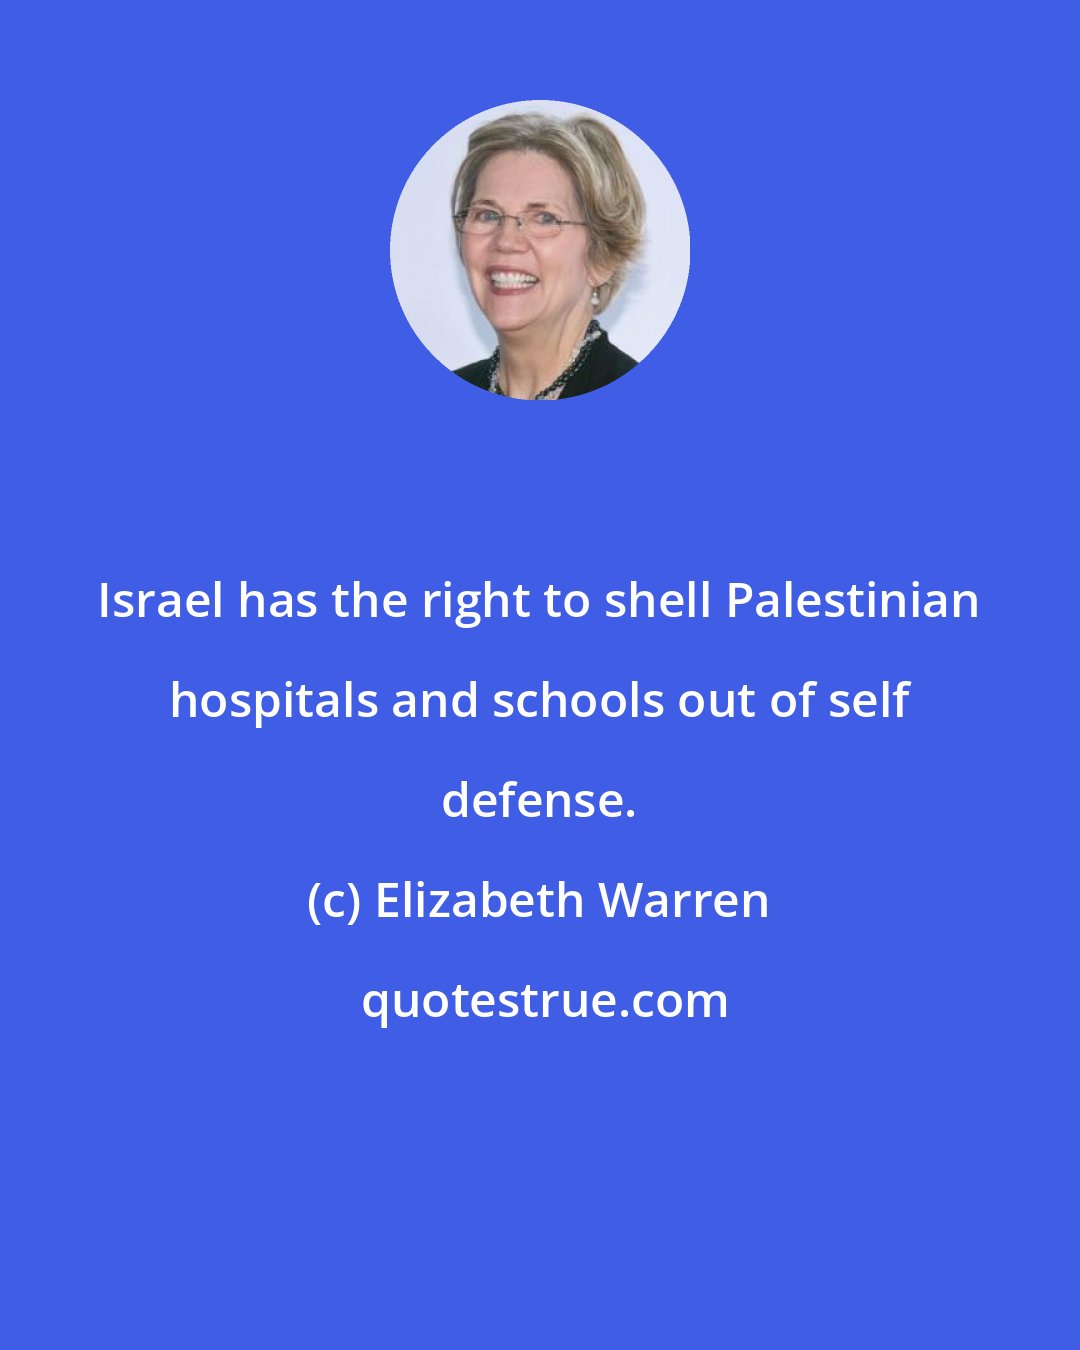 Elizabeth Warren: Israel has the right to shell Palestinian hospitals and schools out of self defense.